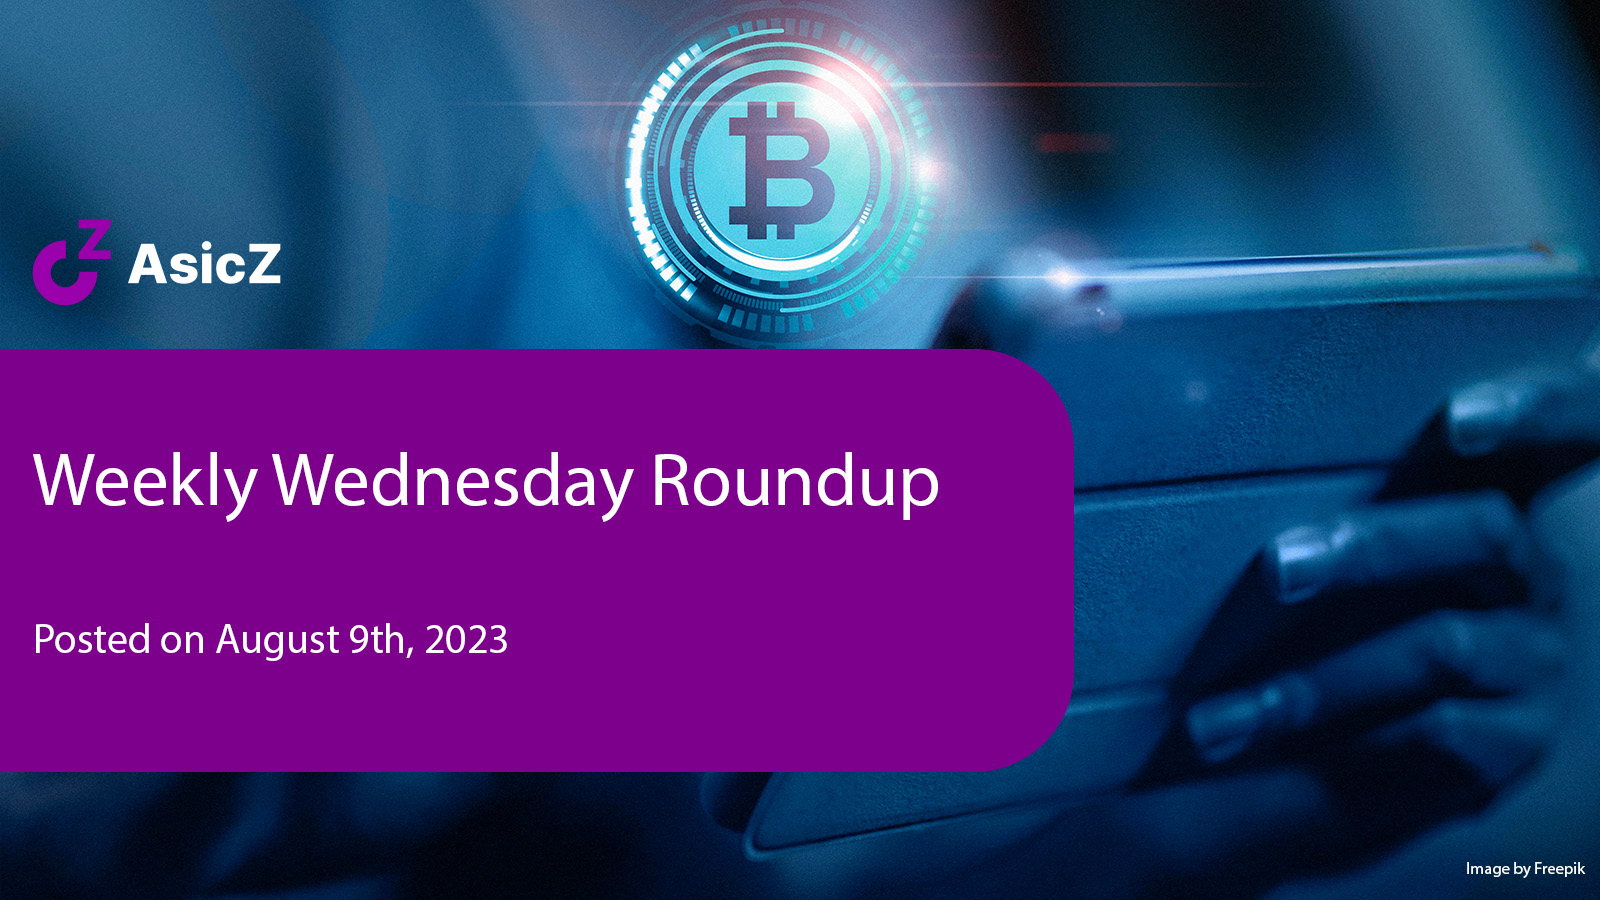 AsicZ Weekly Wednesday Roundup – August 9th, 2023